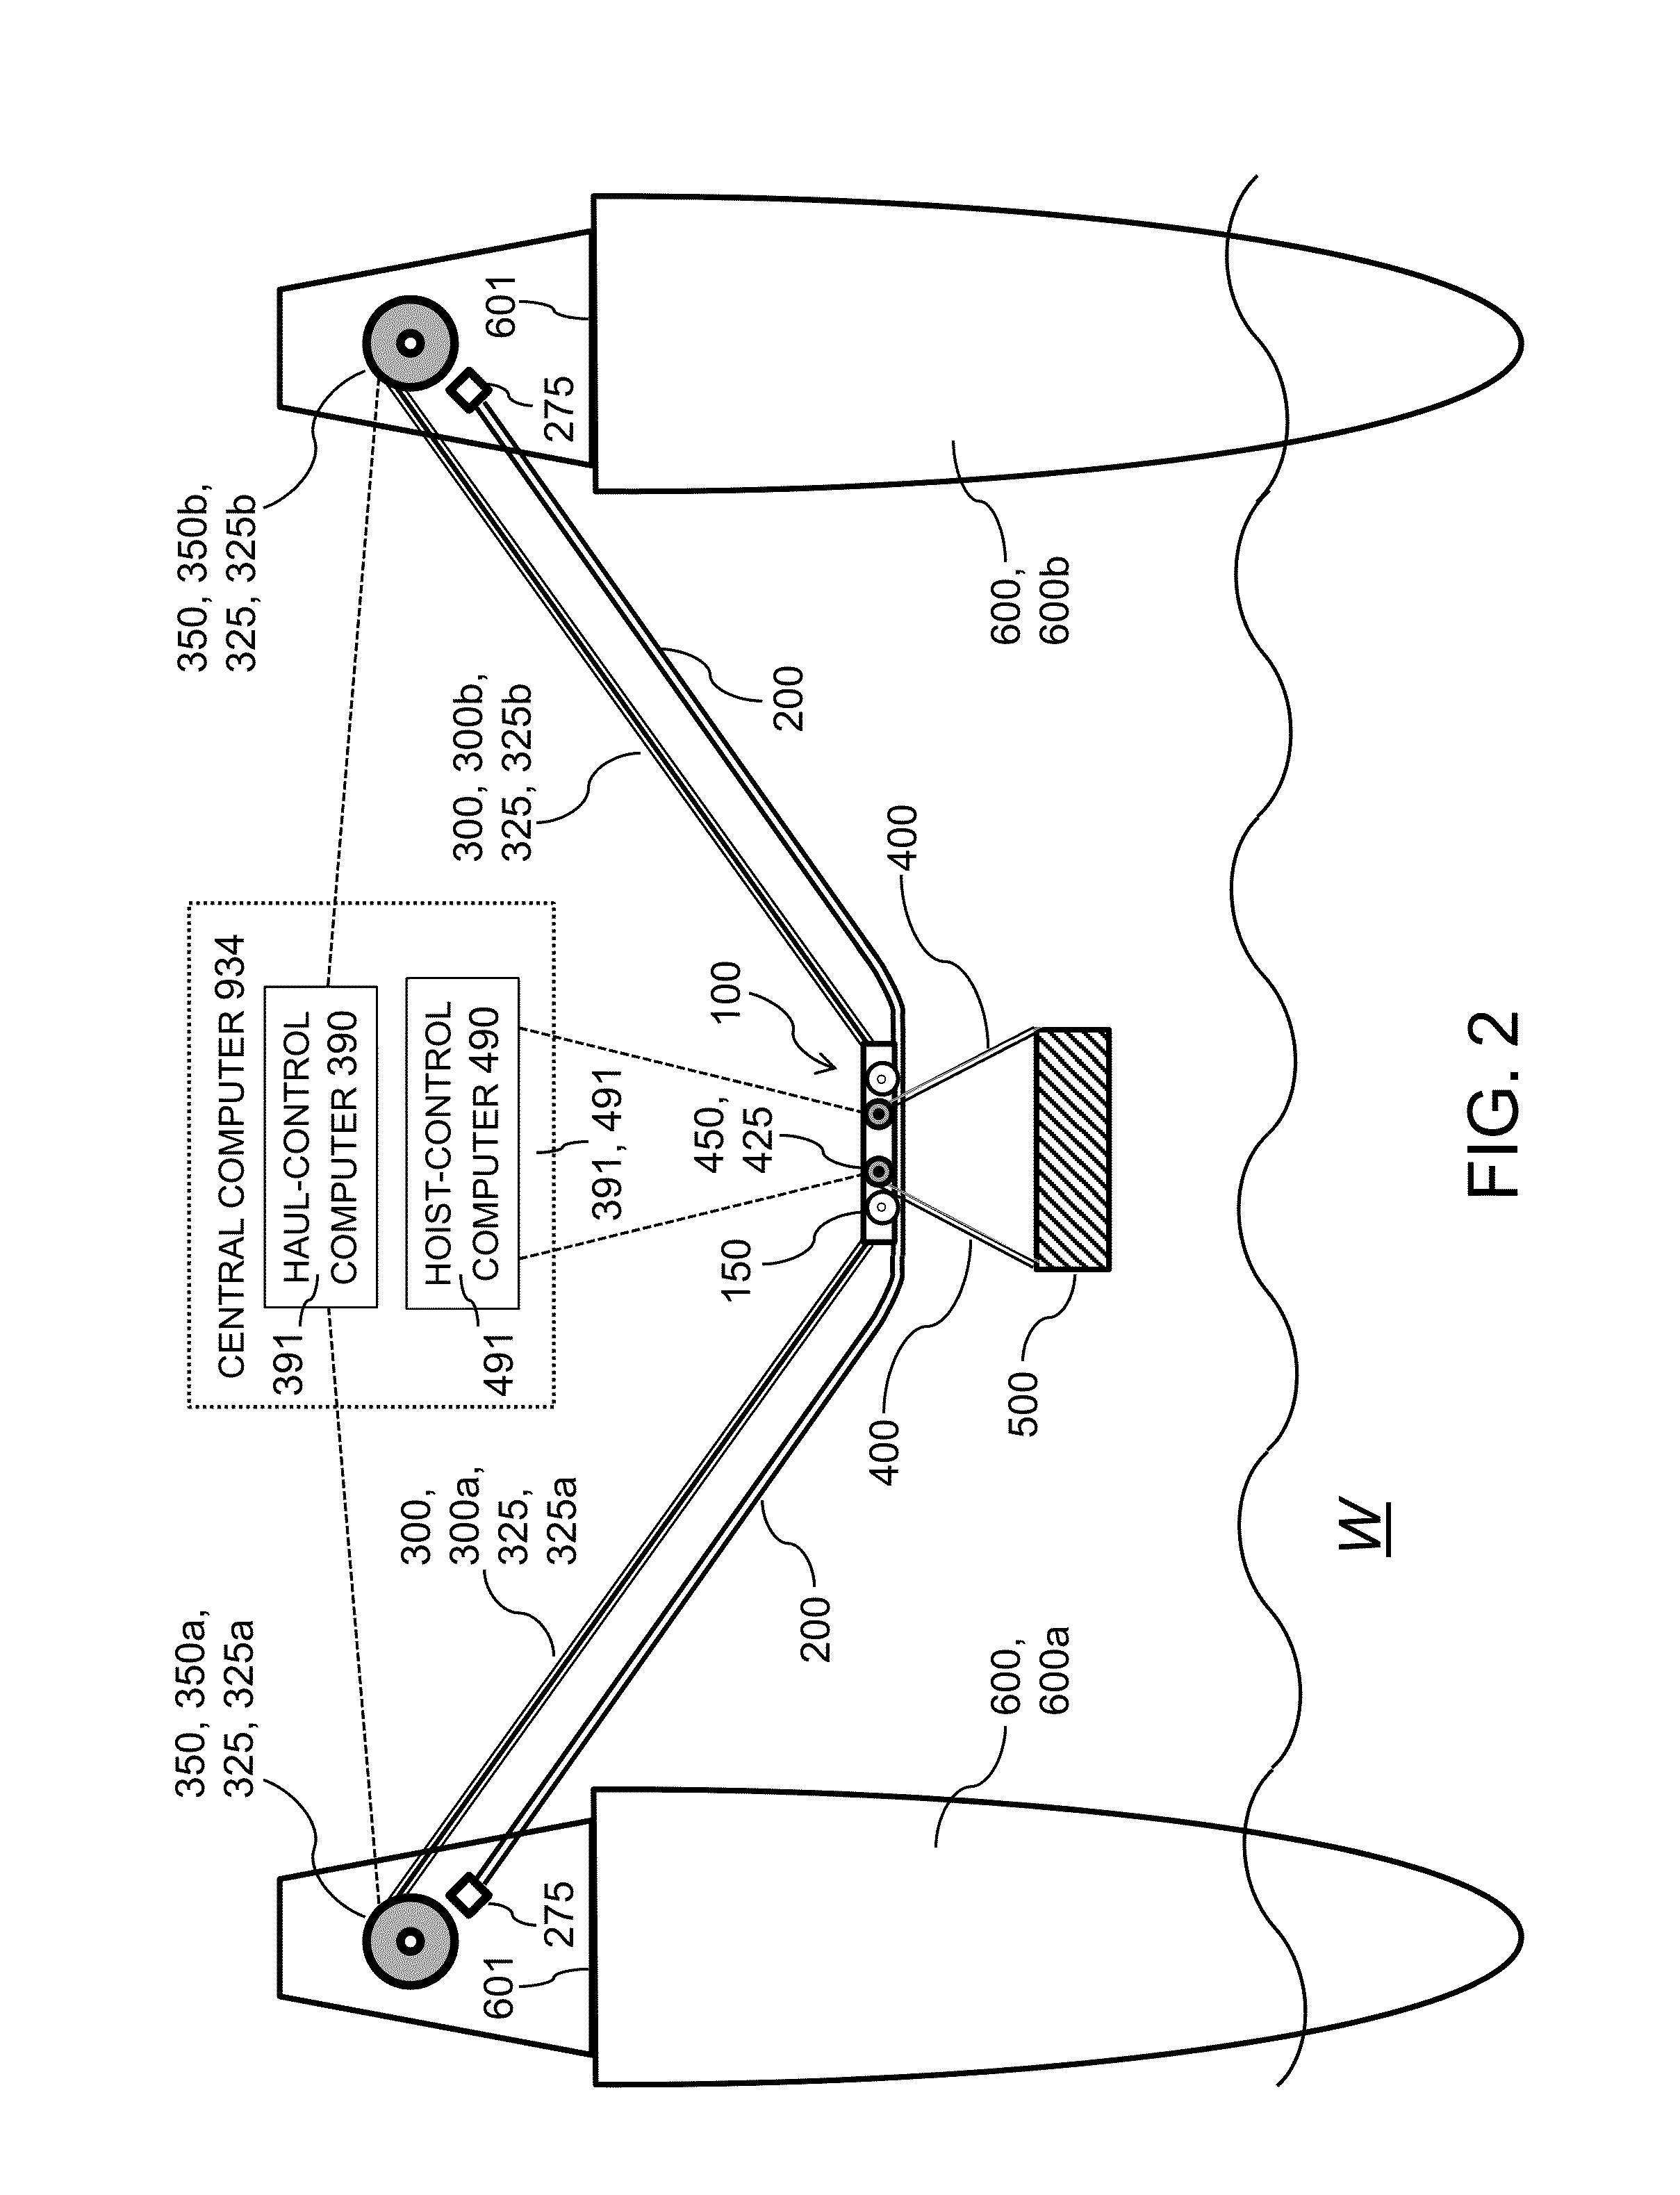 Trolley-payload inter-ship transfer system